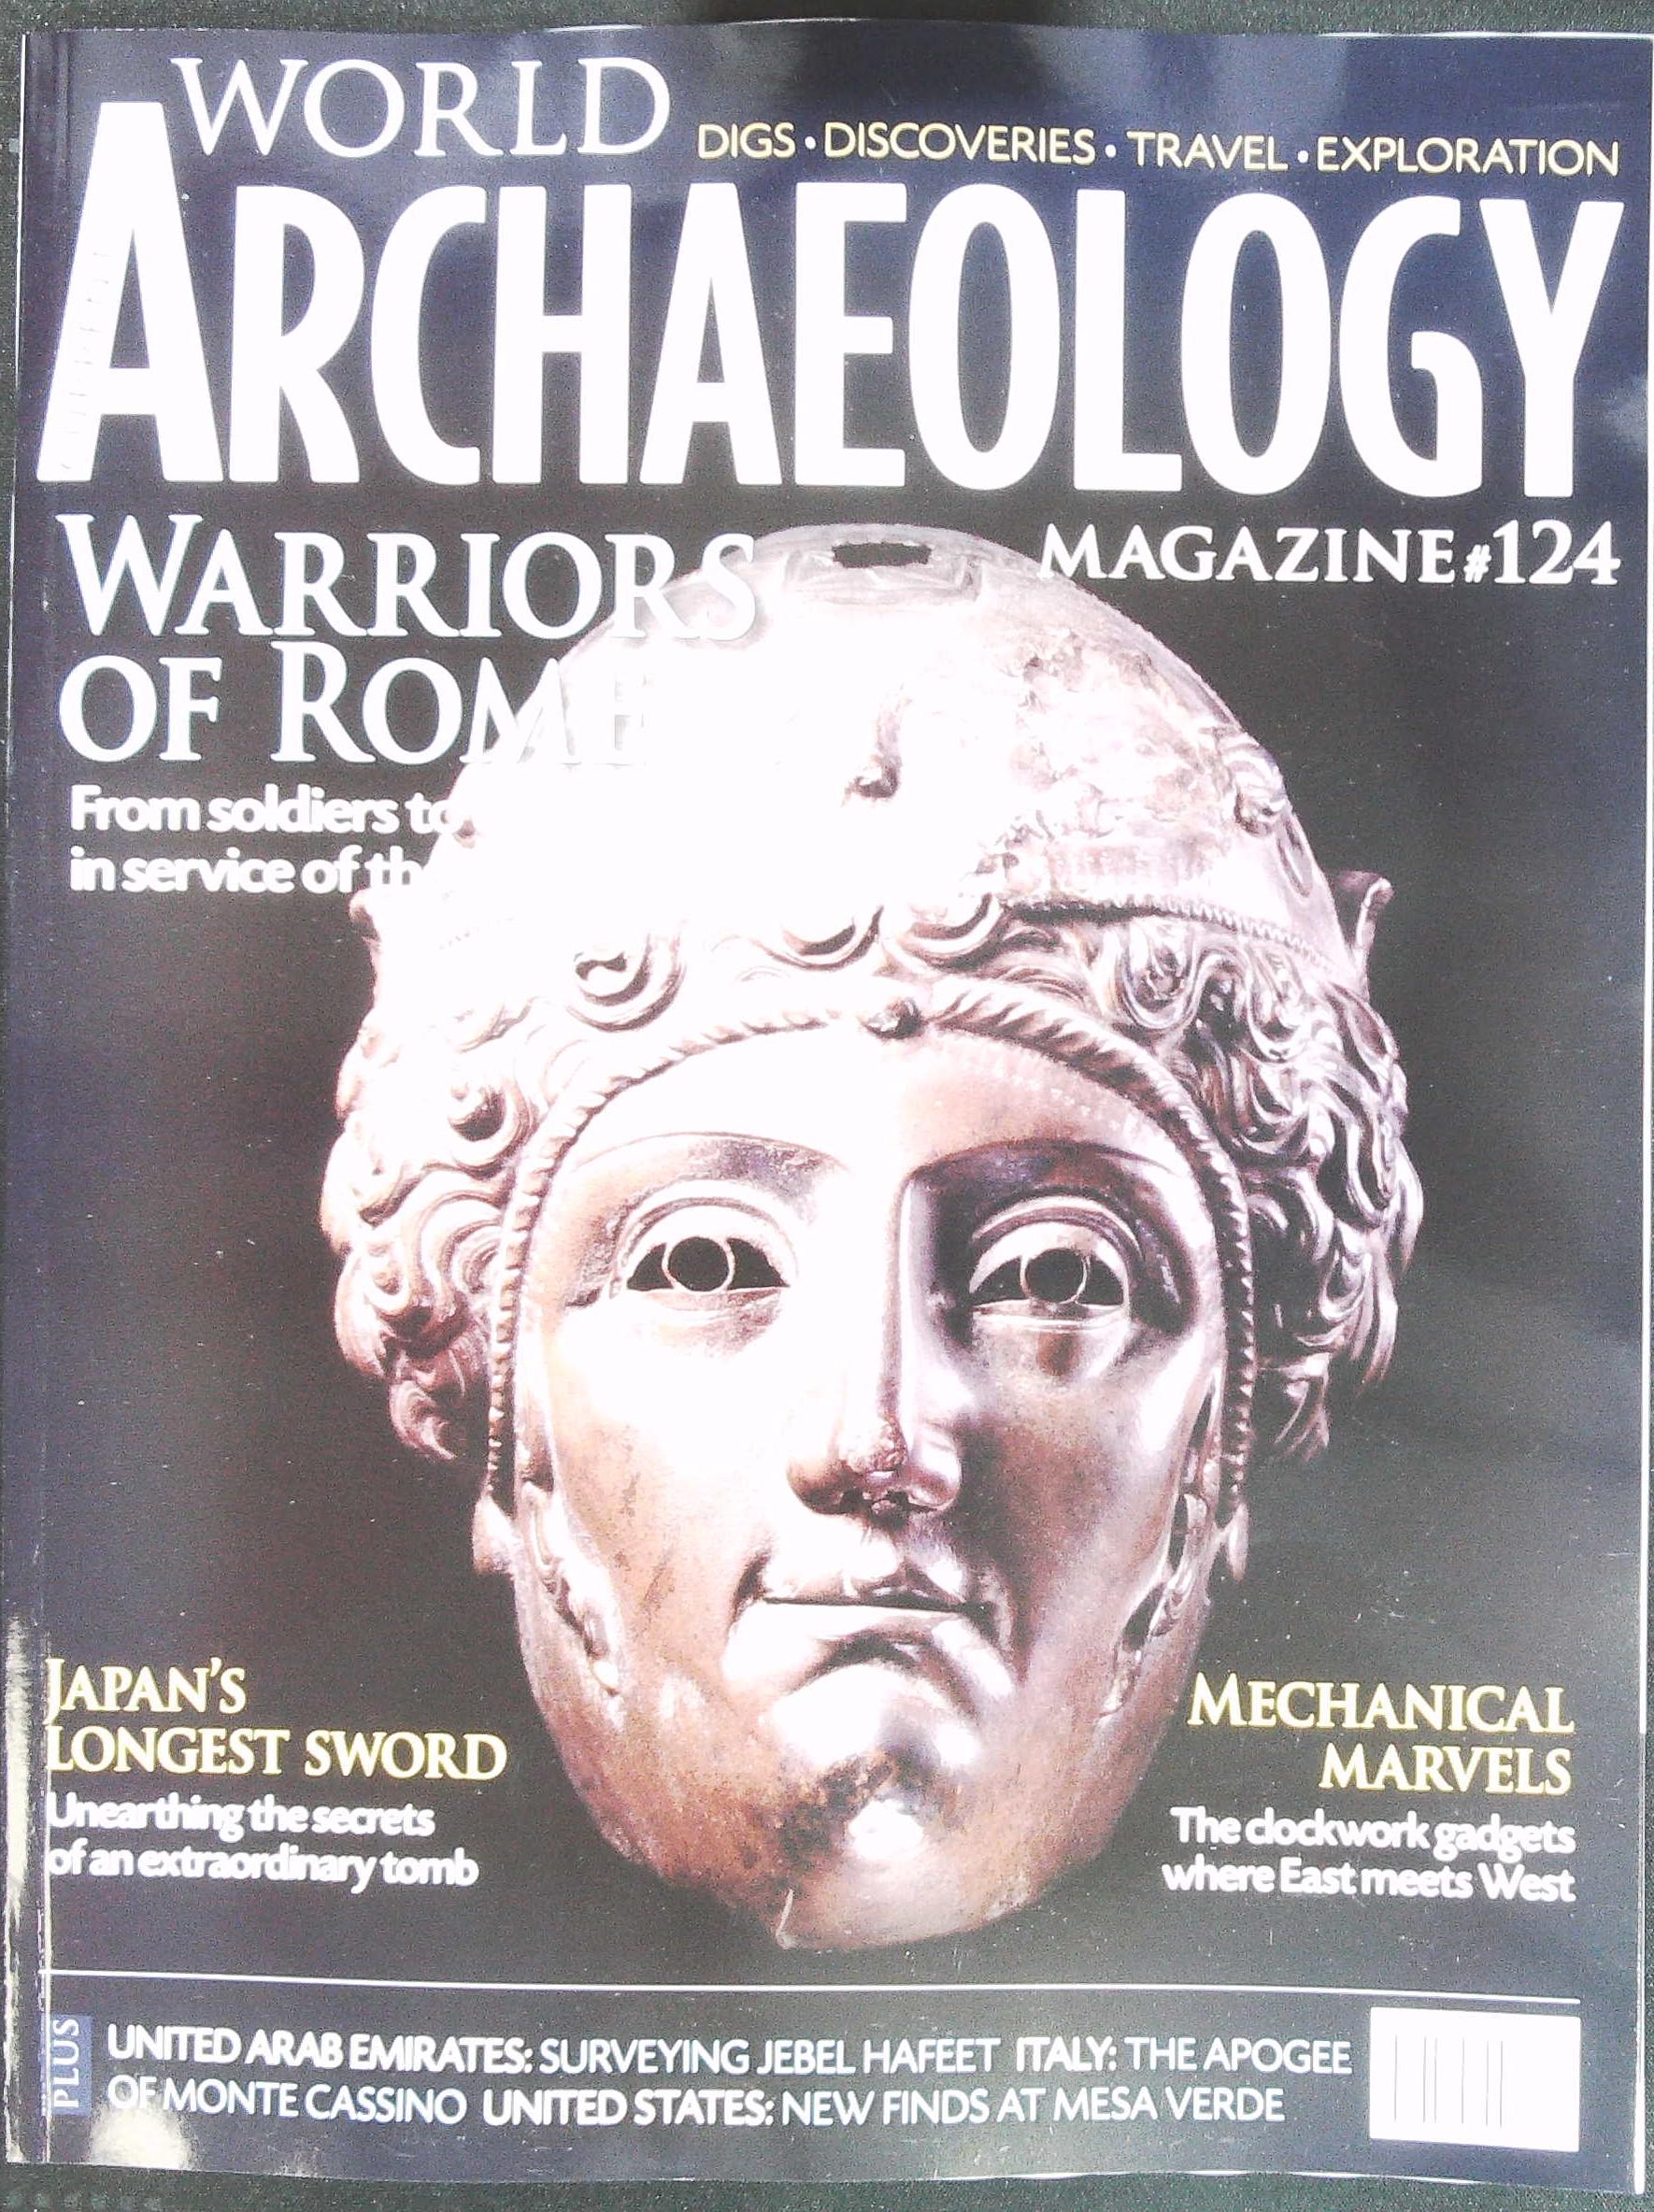 CURRENT WORLD ARCHAEOLOGY